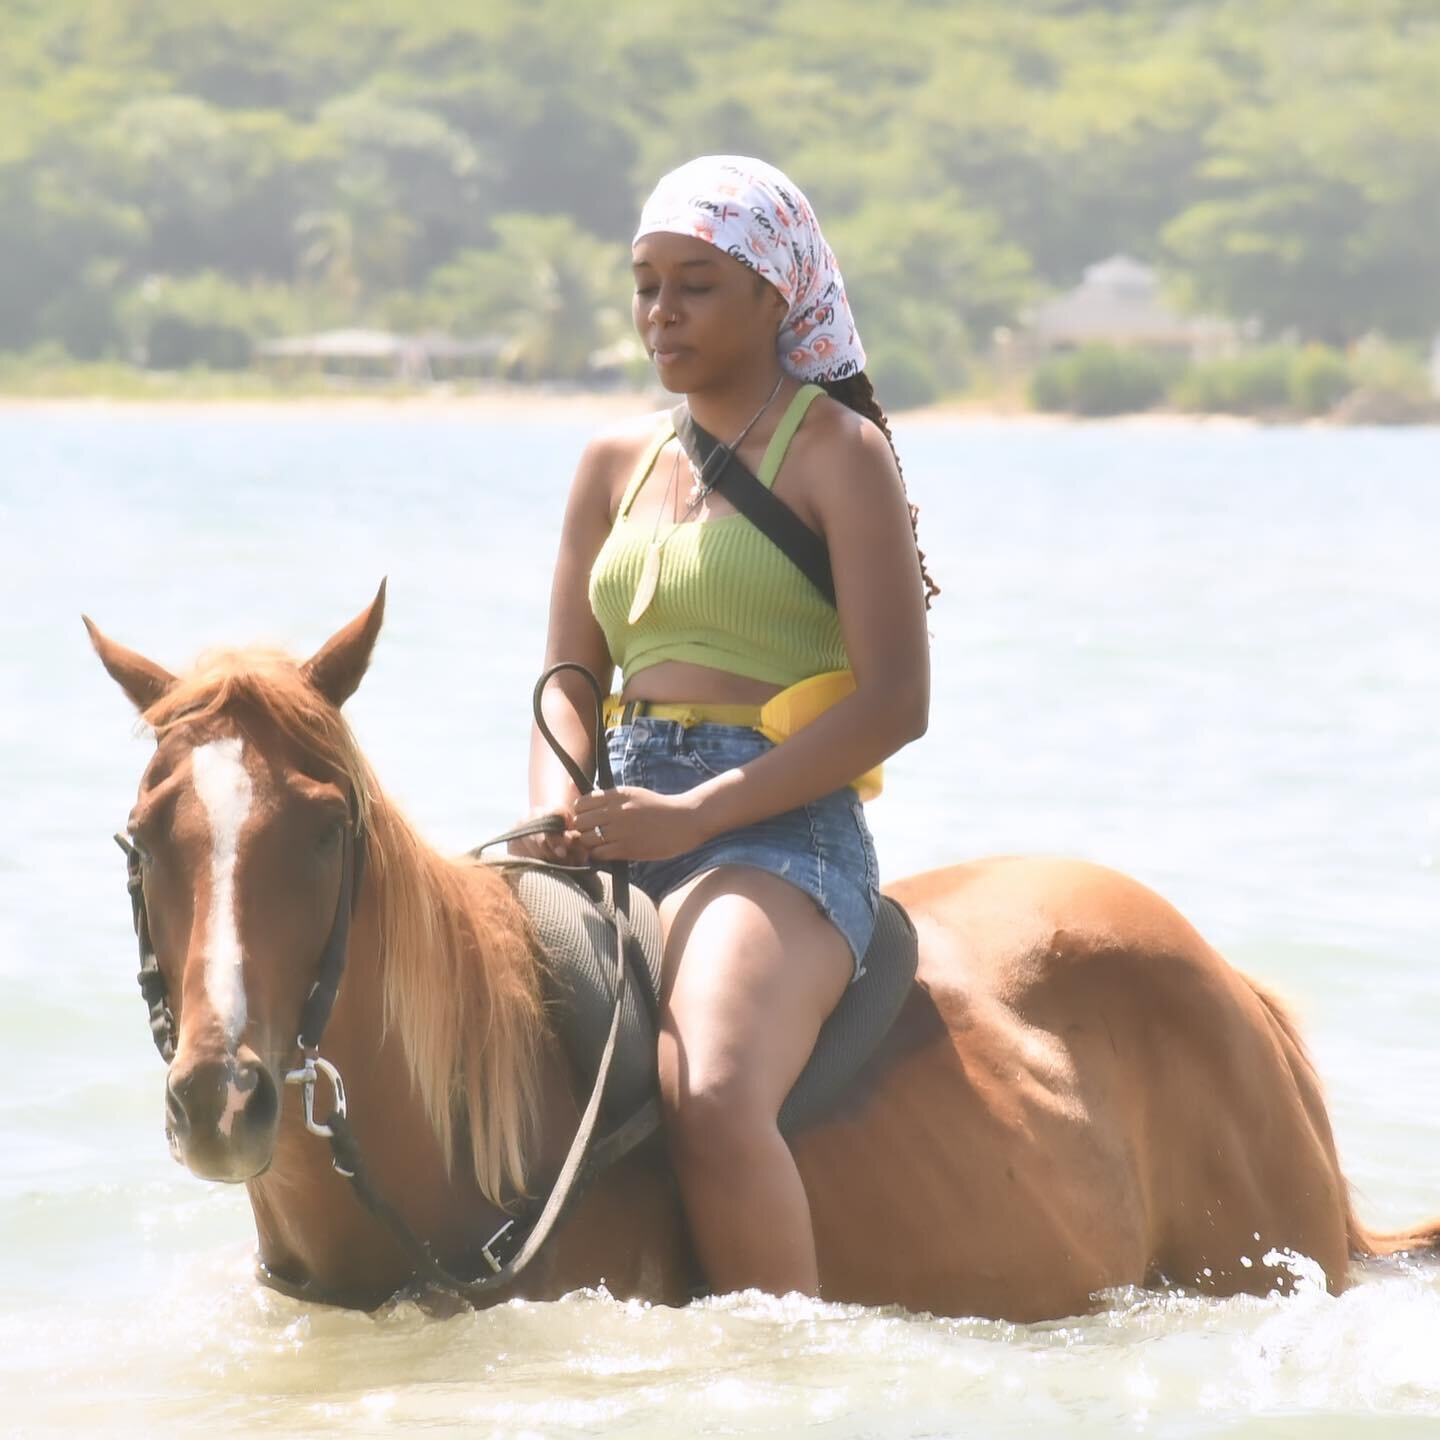 In the need to get away I found something more. I found peace, sisterhood, and many memories. I took time with spirit and let go where I didn&rsquo;t need to hold on so tightly. 
#GirlsTrip #Jamaica #healing